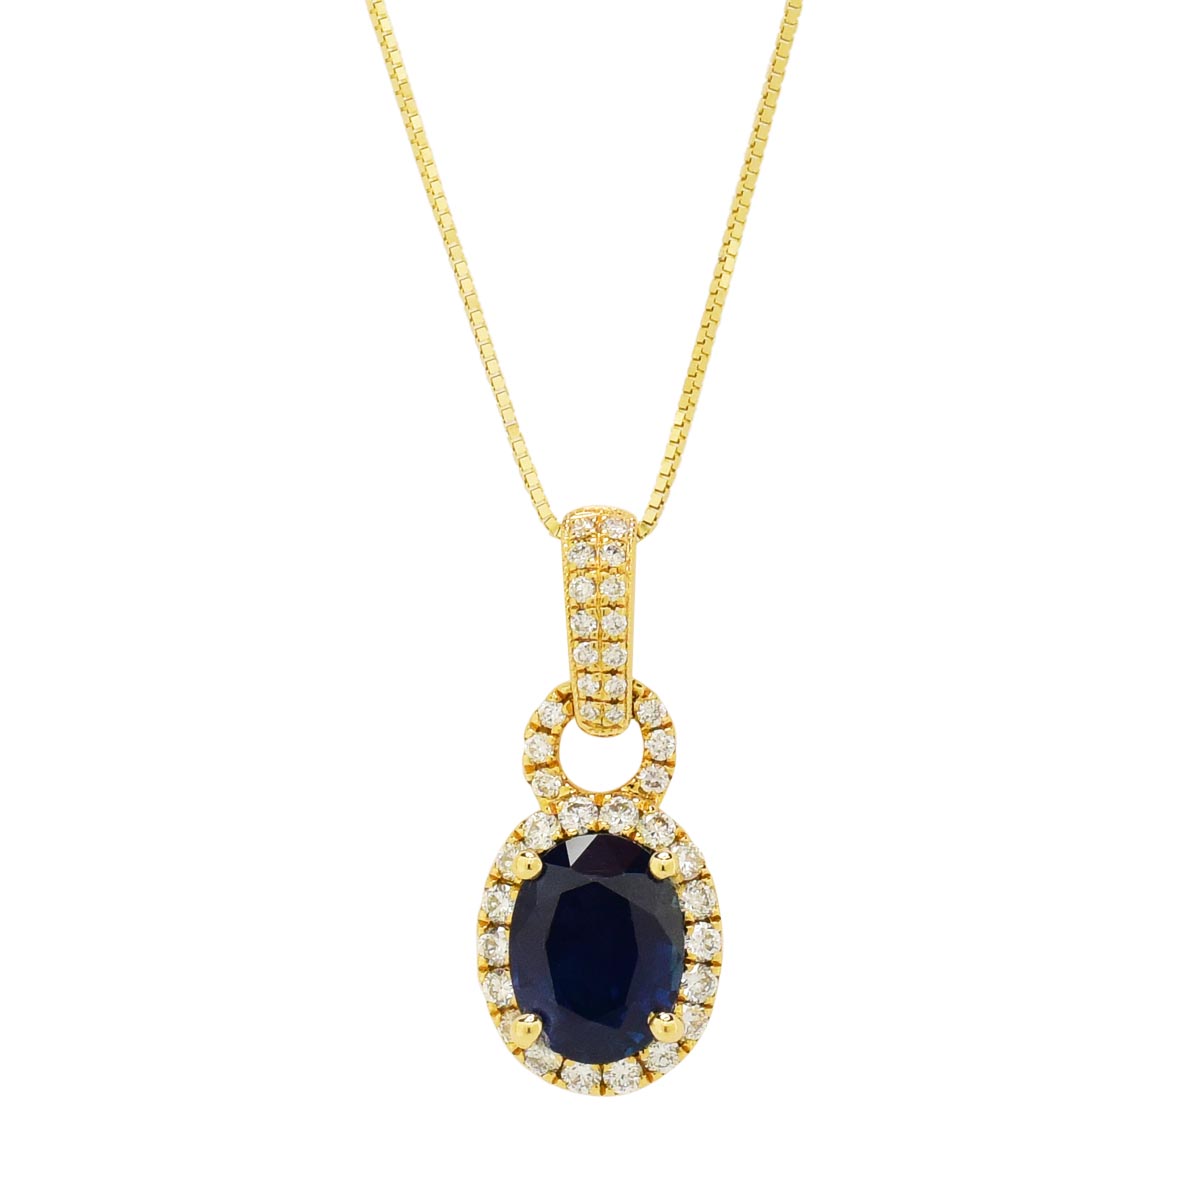 Oval Sapphire Necklace in 14kt Yellow Gold with Diamonds (1/4ct tw)